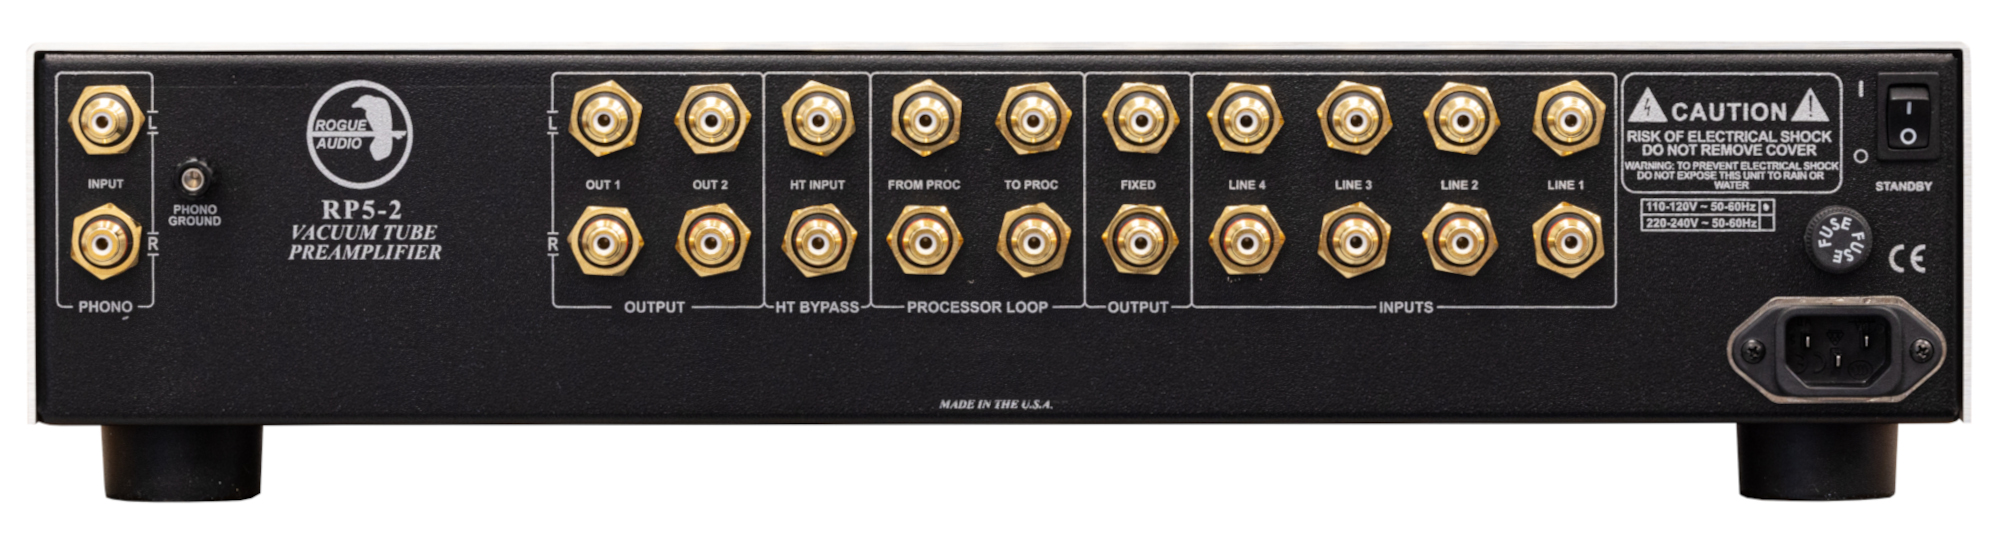 Rogue Audio RP-5 v2 preamp rear panel